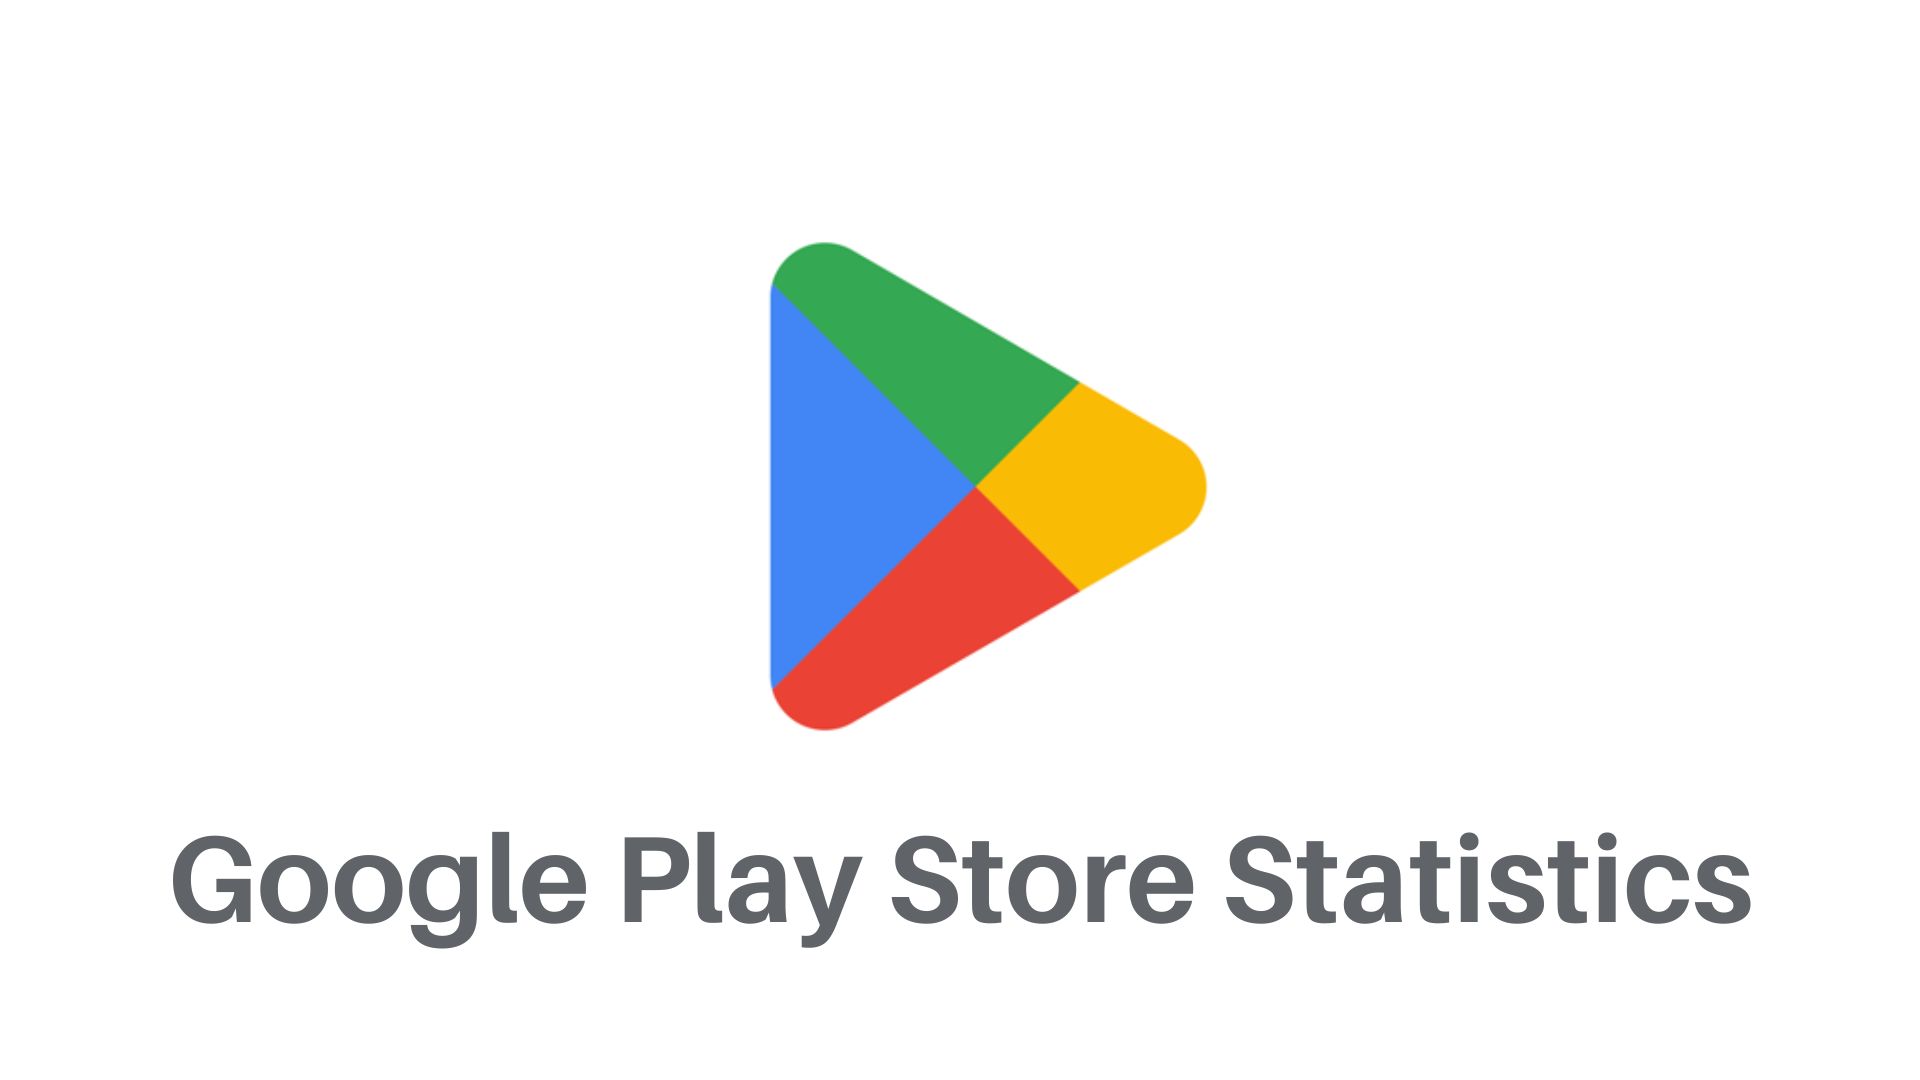 Google Play Store News: Google Play Store now shows app download trends